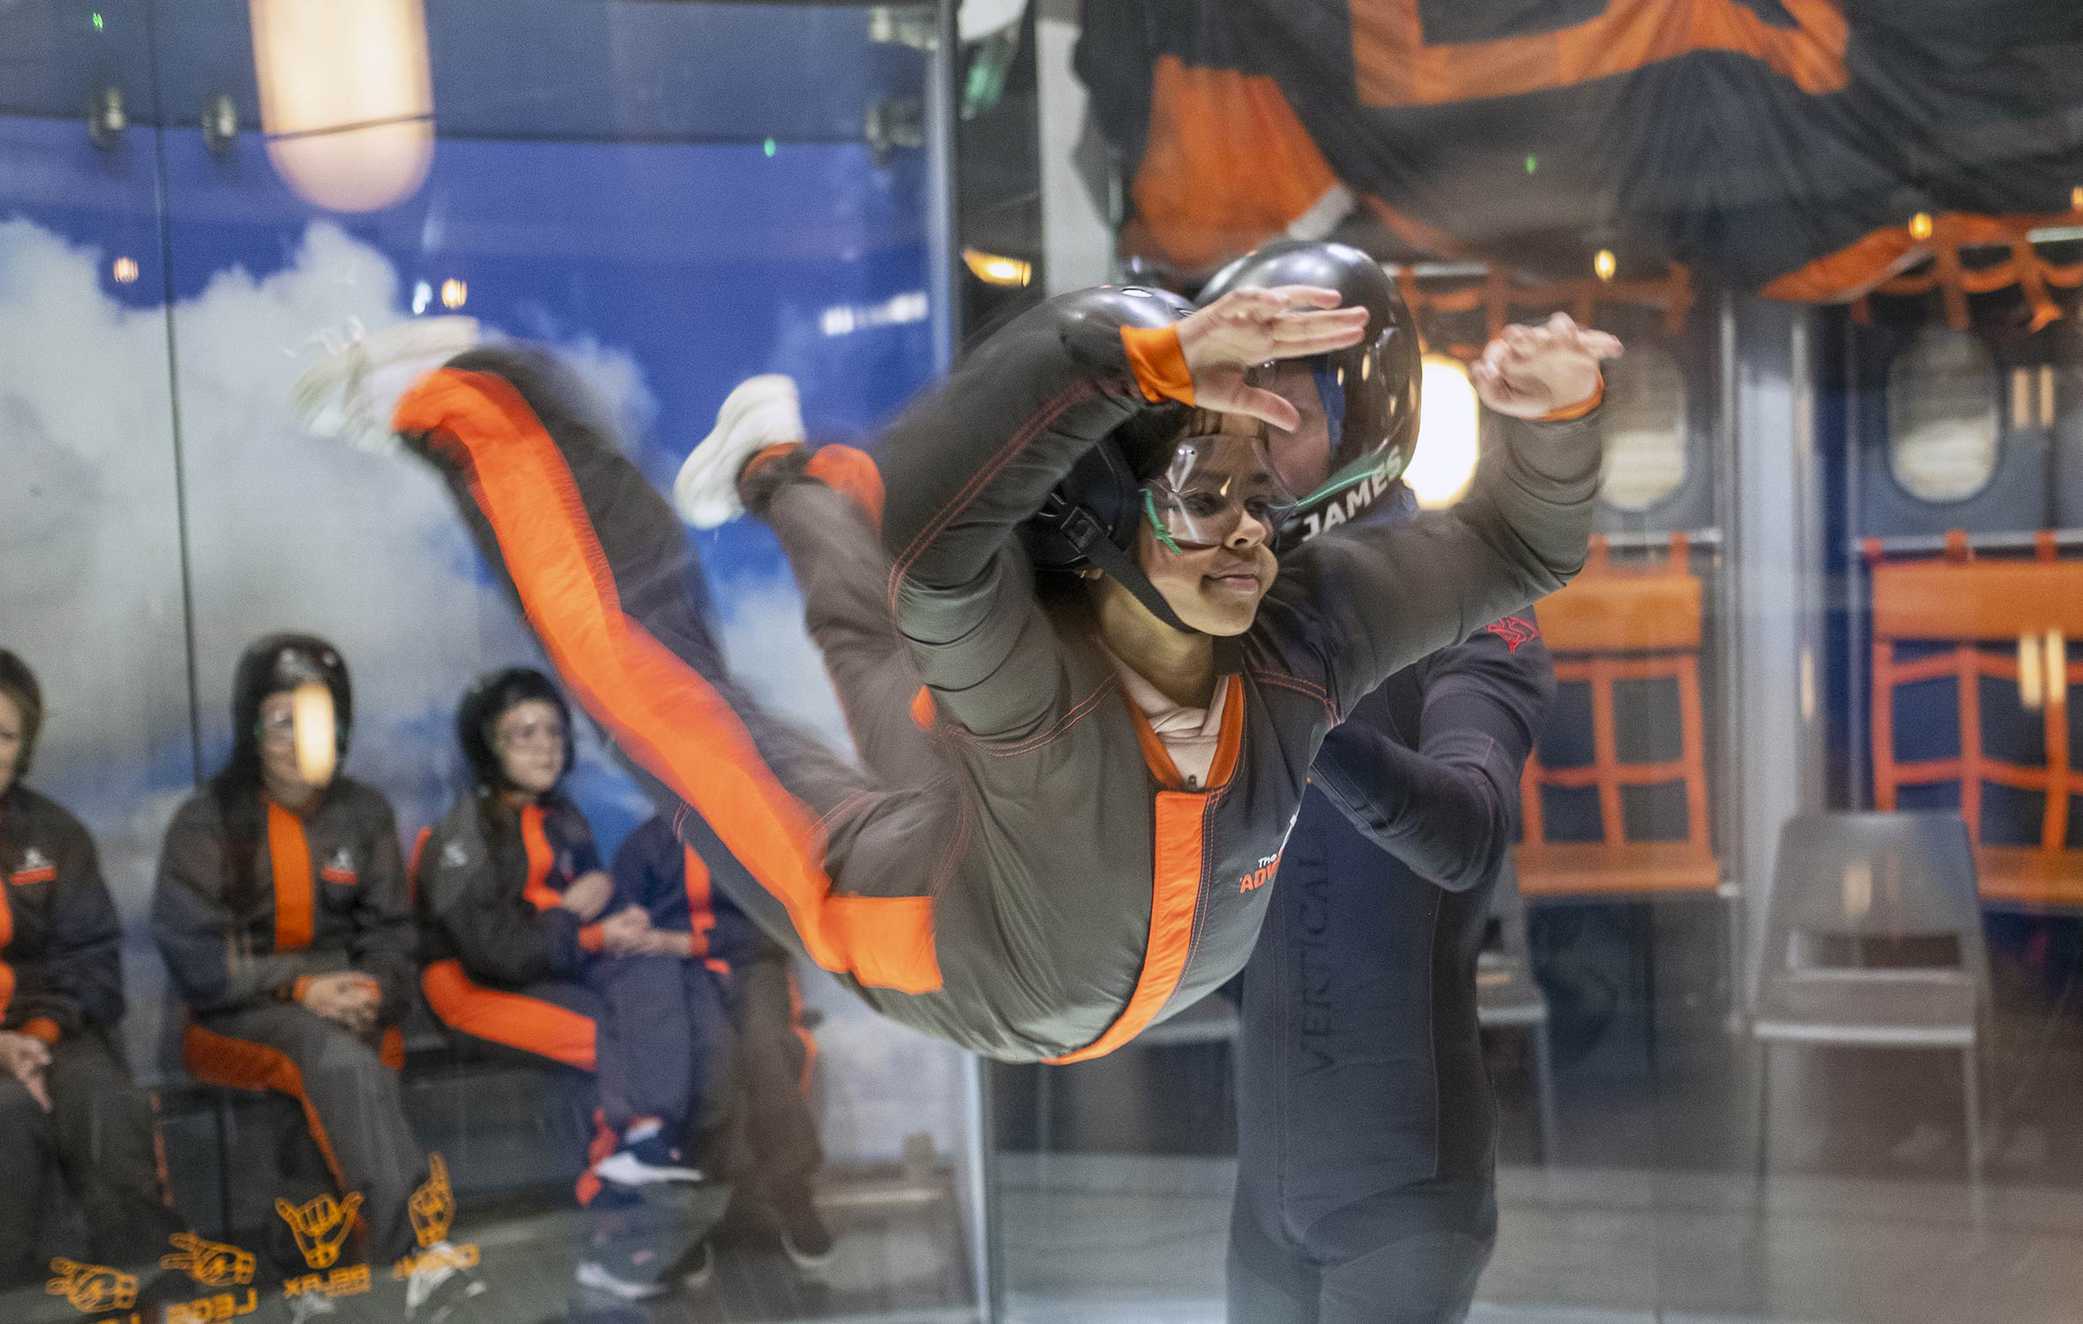 A former wish child trying their hand at indoor skydiving at Bear Grylls Adventure Park.